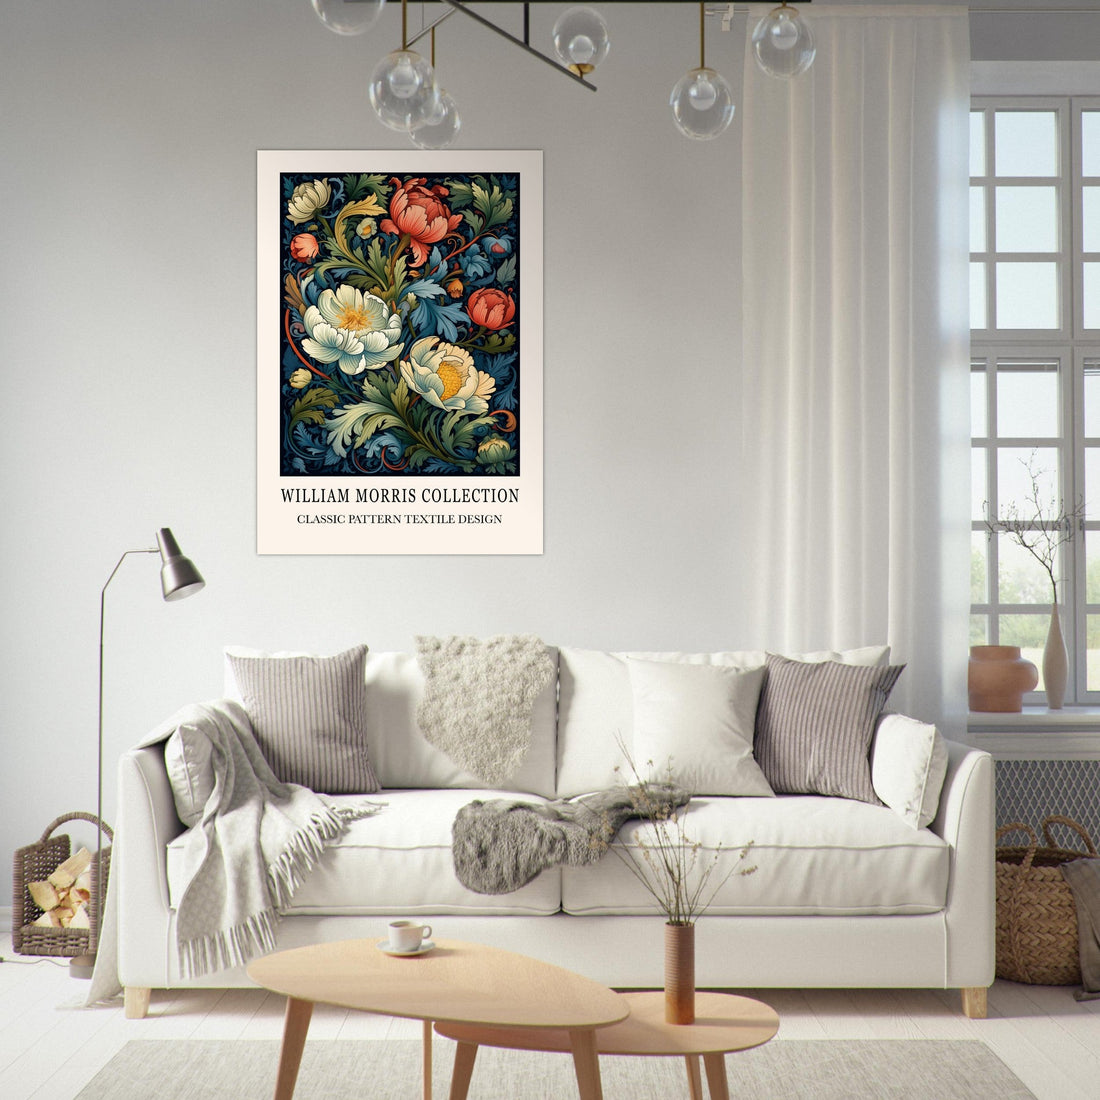 Flowers - William Morris, Arts & Crafts, floral, iconic artists, #illieeart